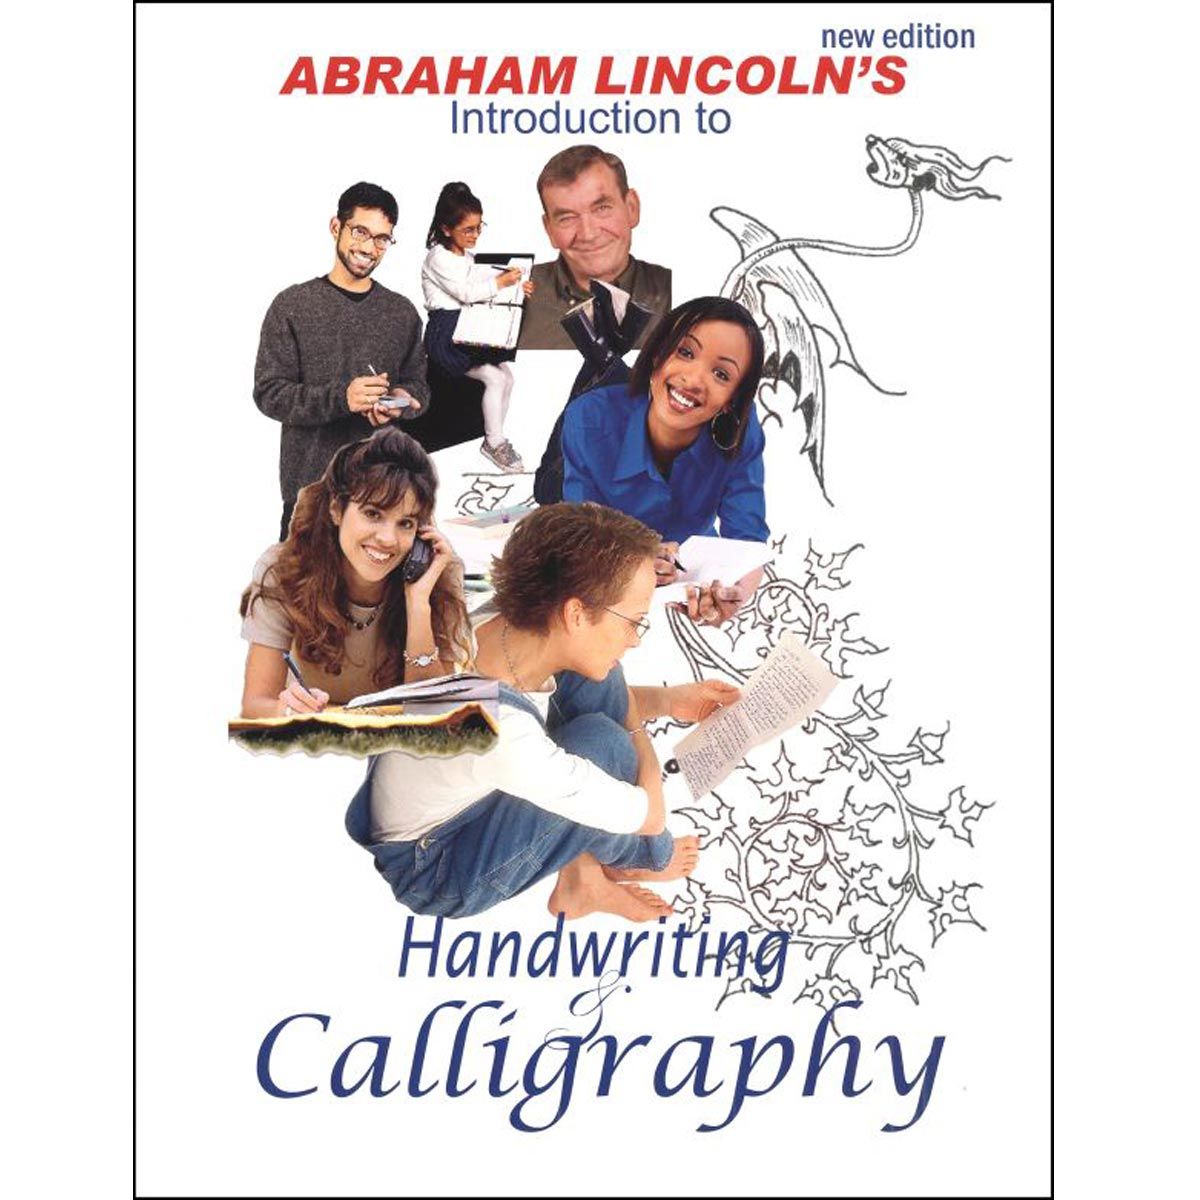 Abraham Lincoln's Introduction Handwriting Calligraphy